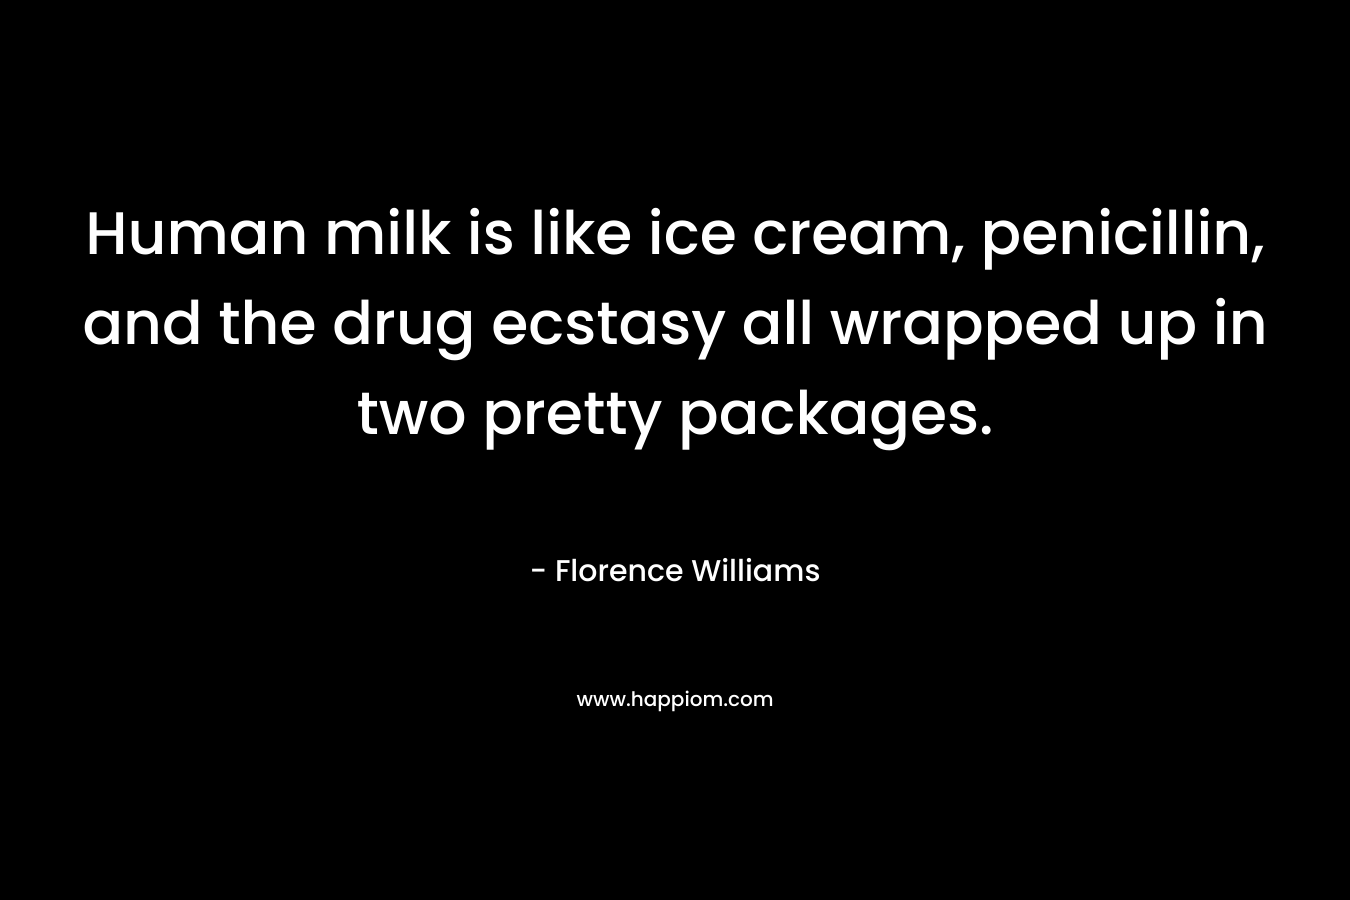 Human milk is like ice cream, penicillin, and the drug ecstasy all wrapped up in two pretty packages.